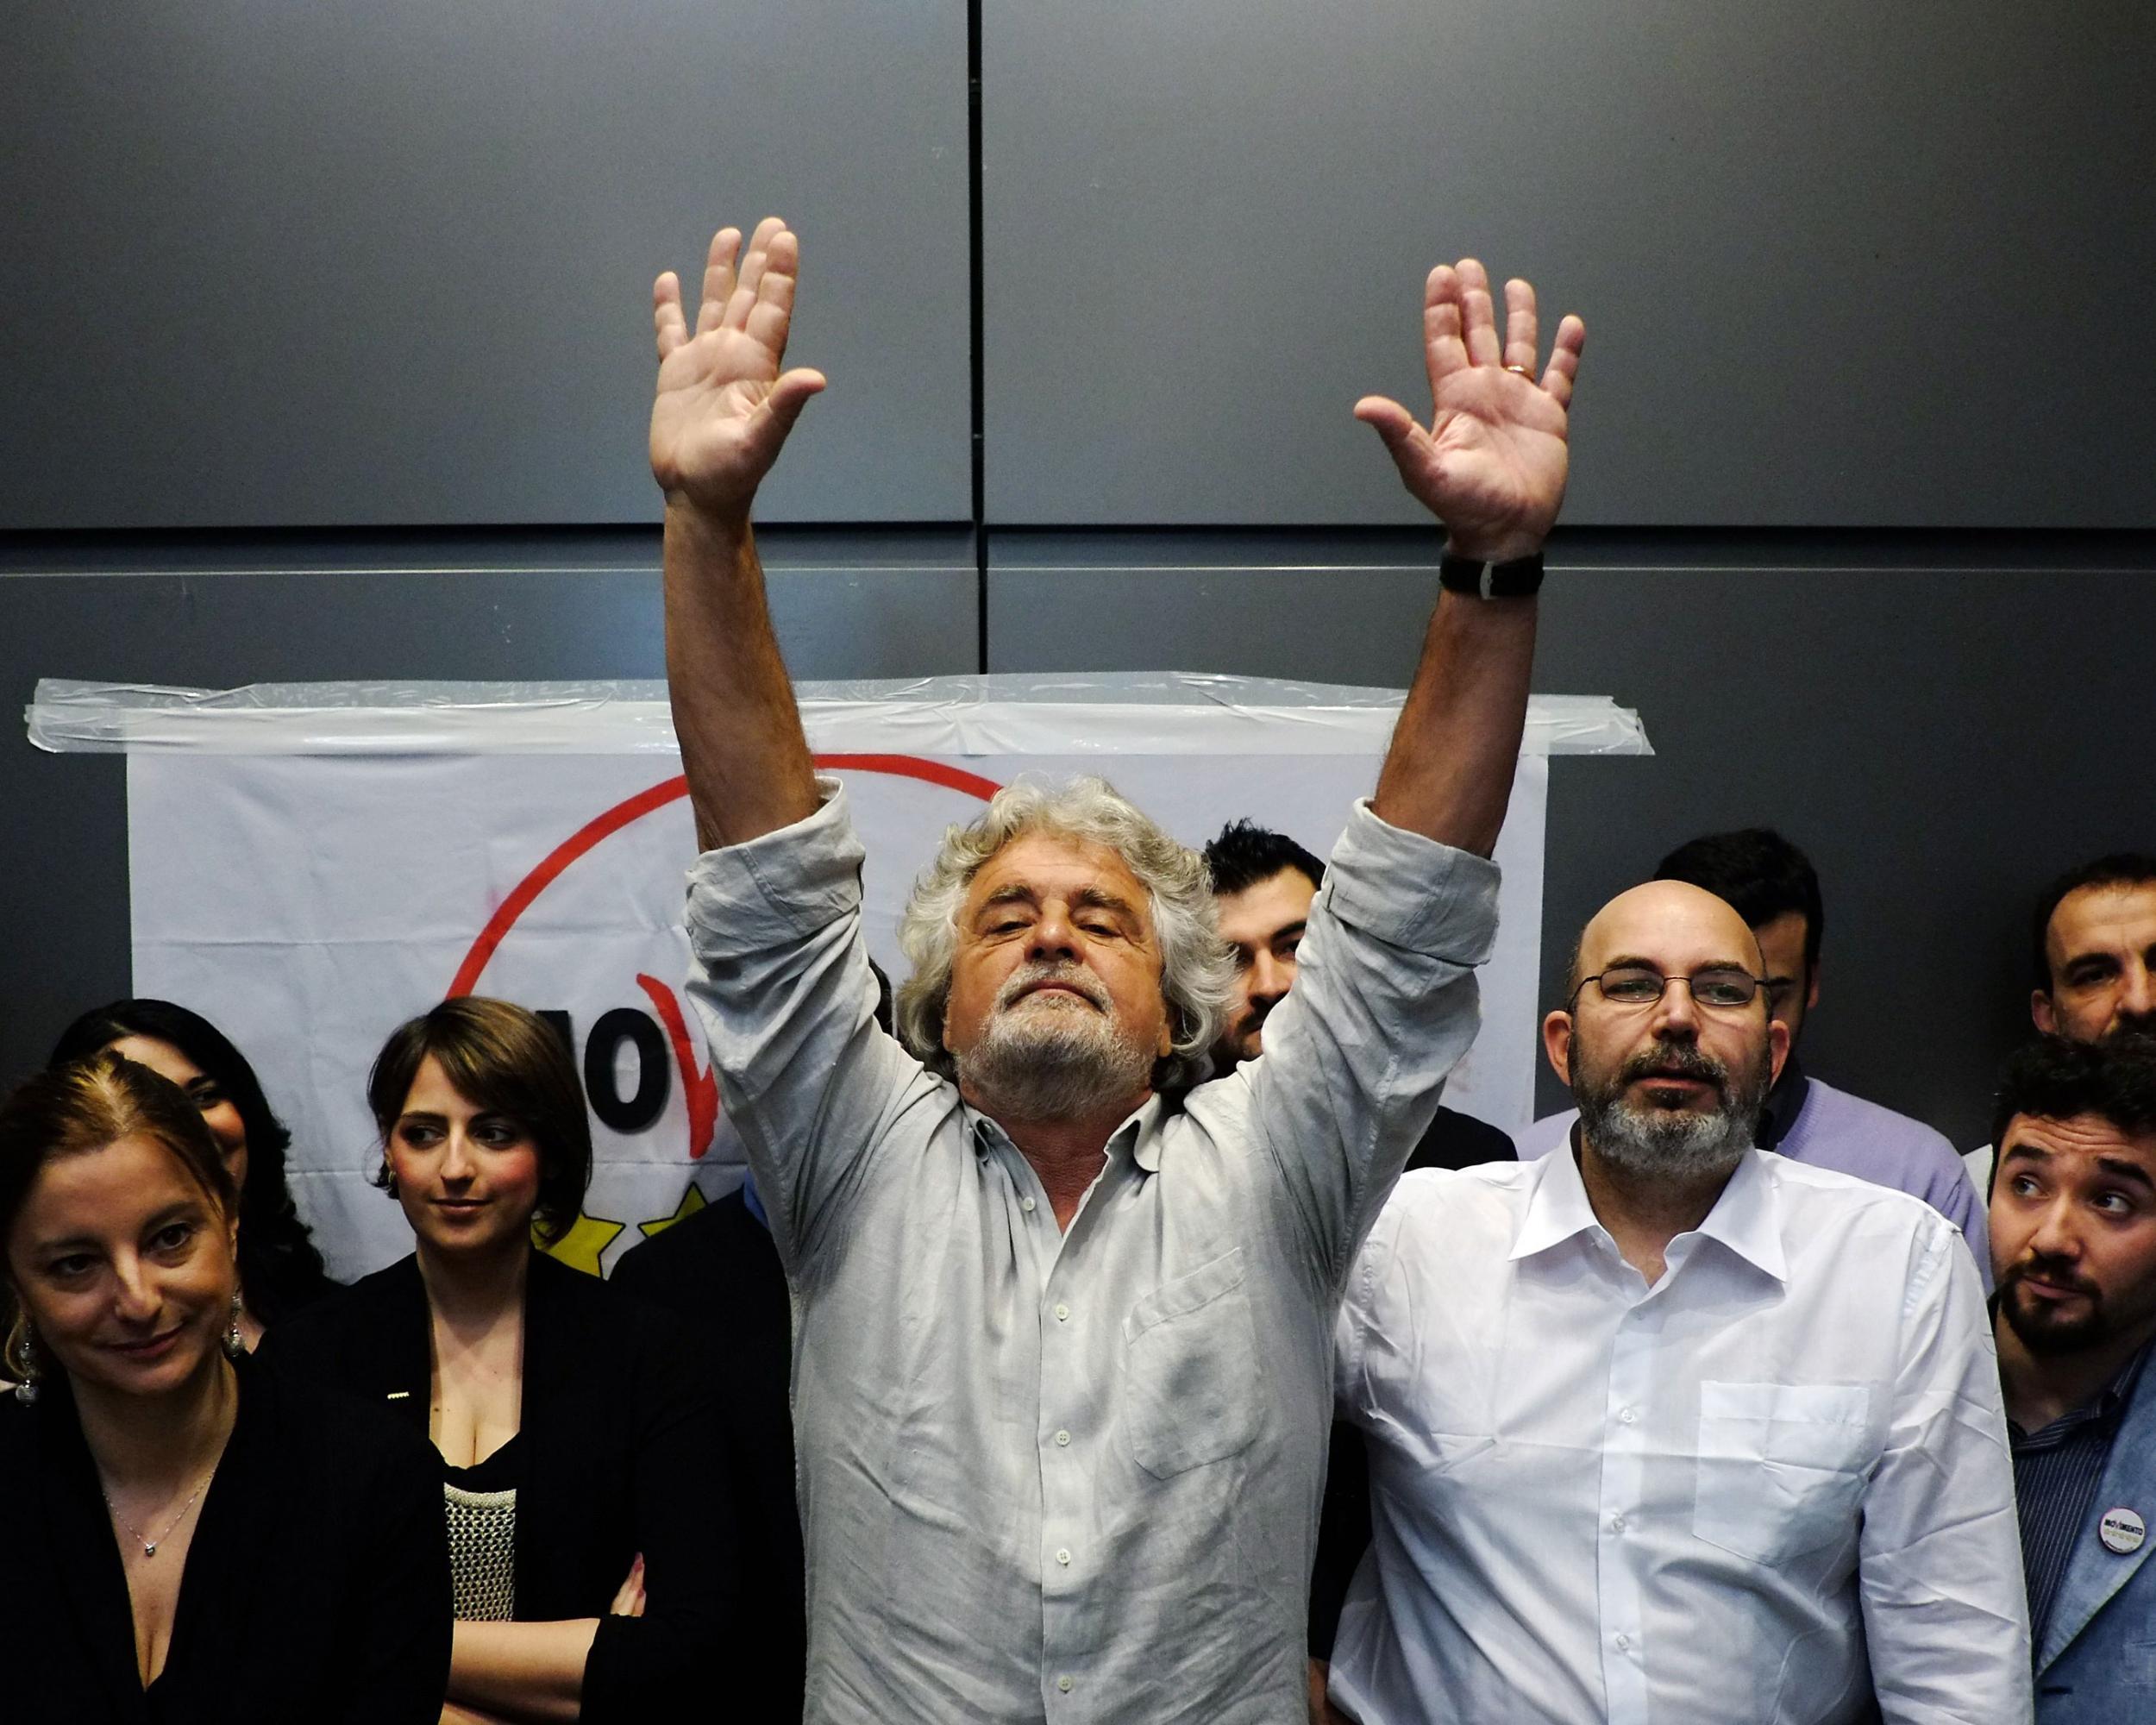 Italy's Five Star Movement has been rocked by mafia allegations